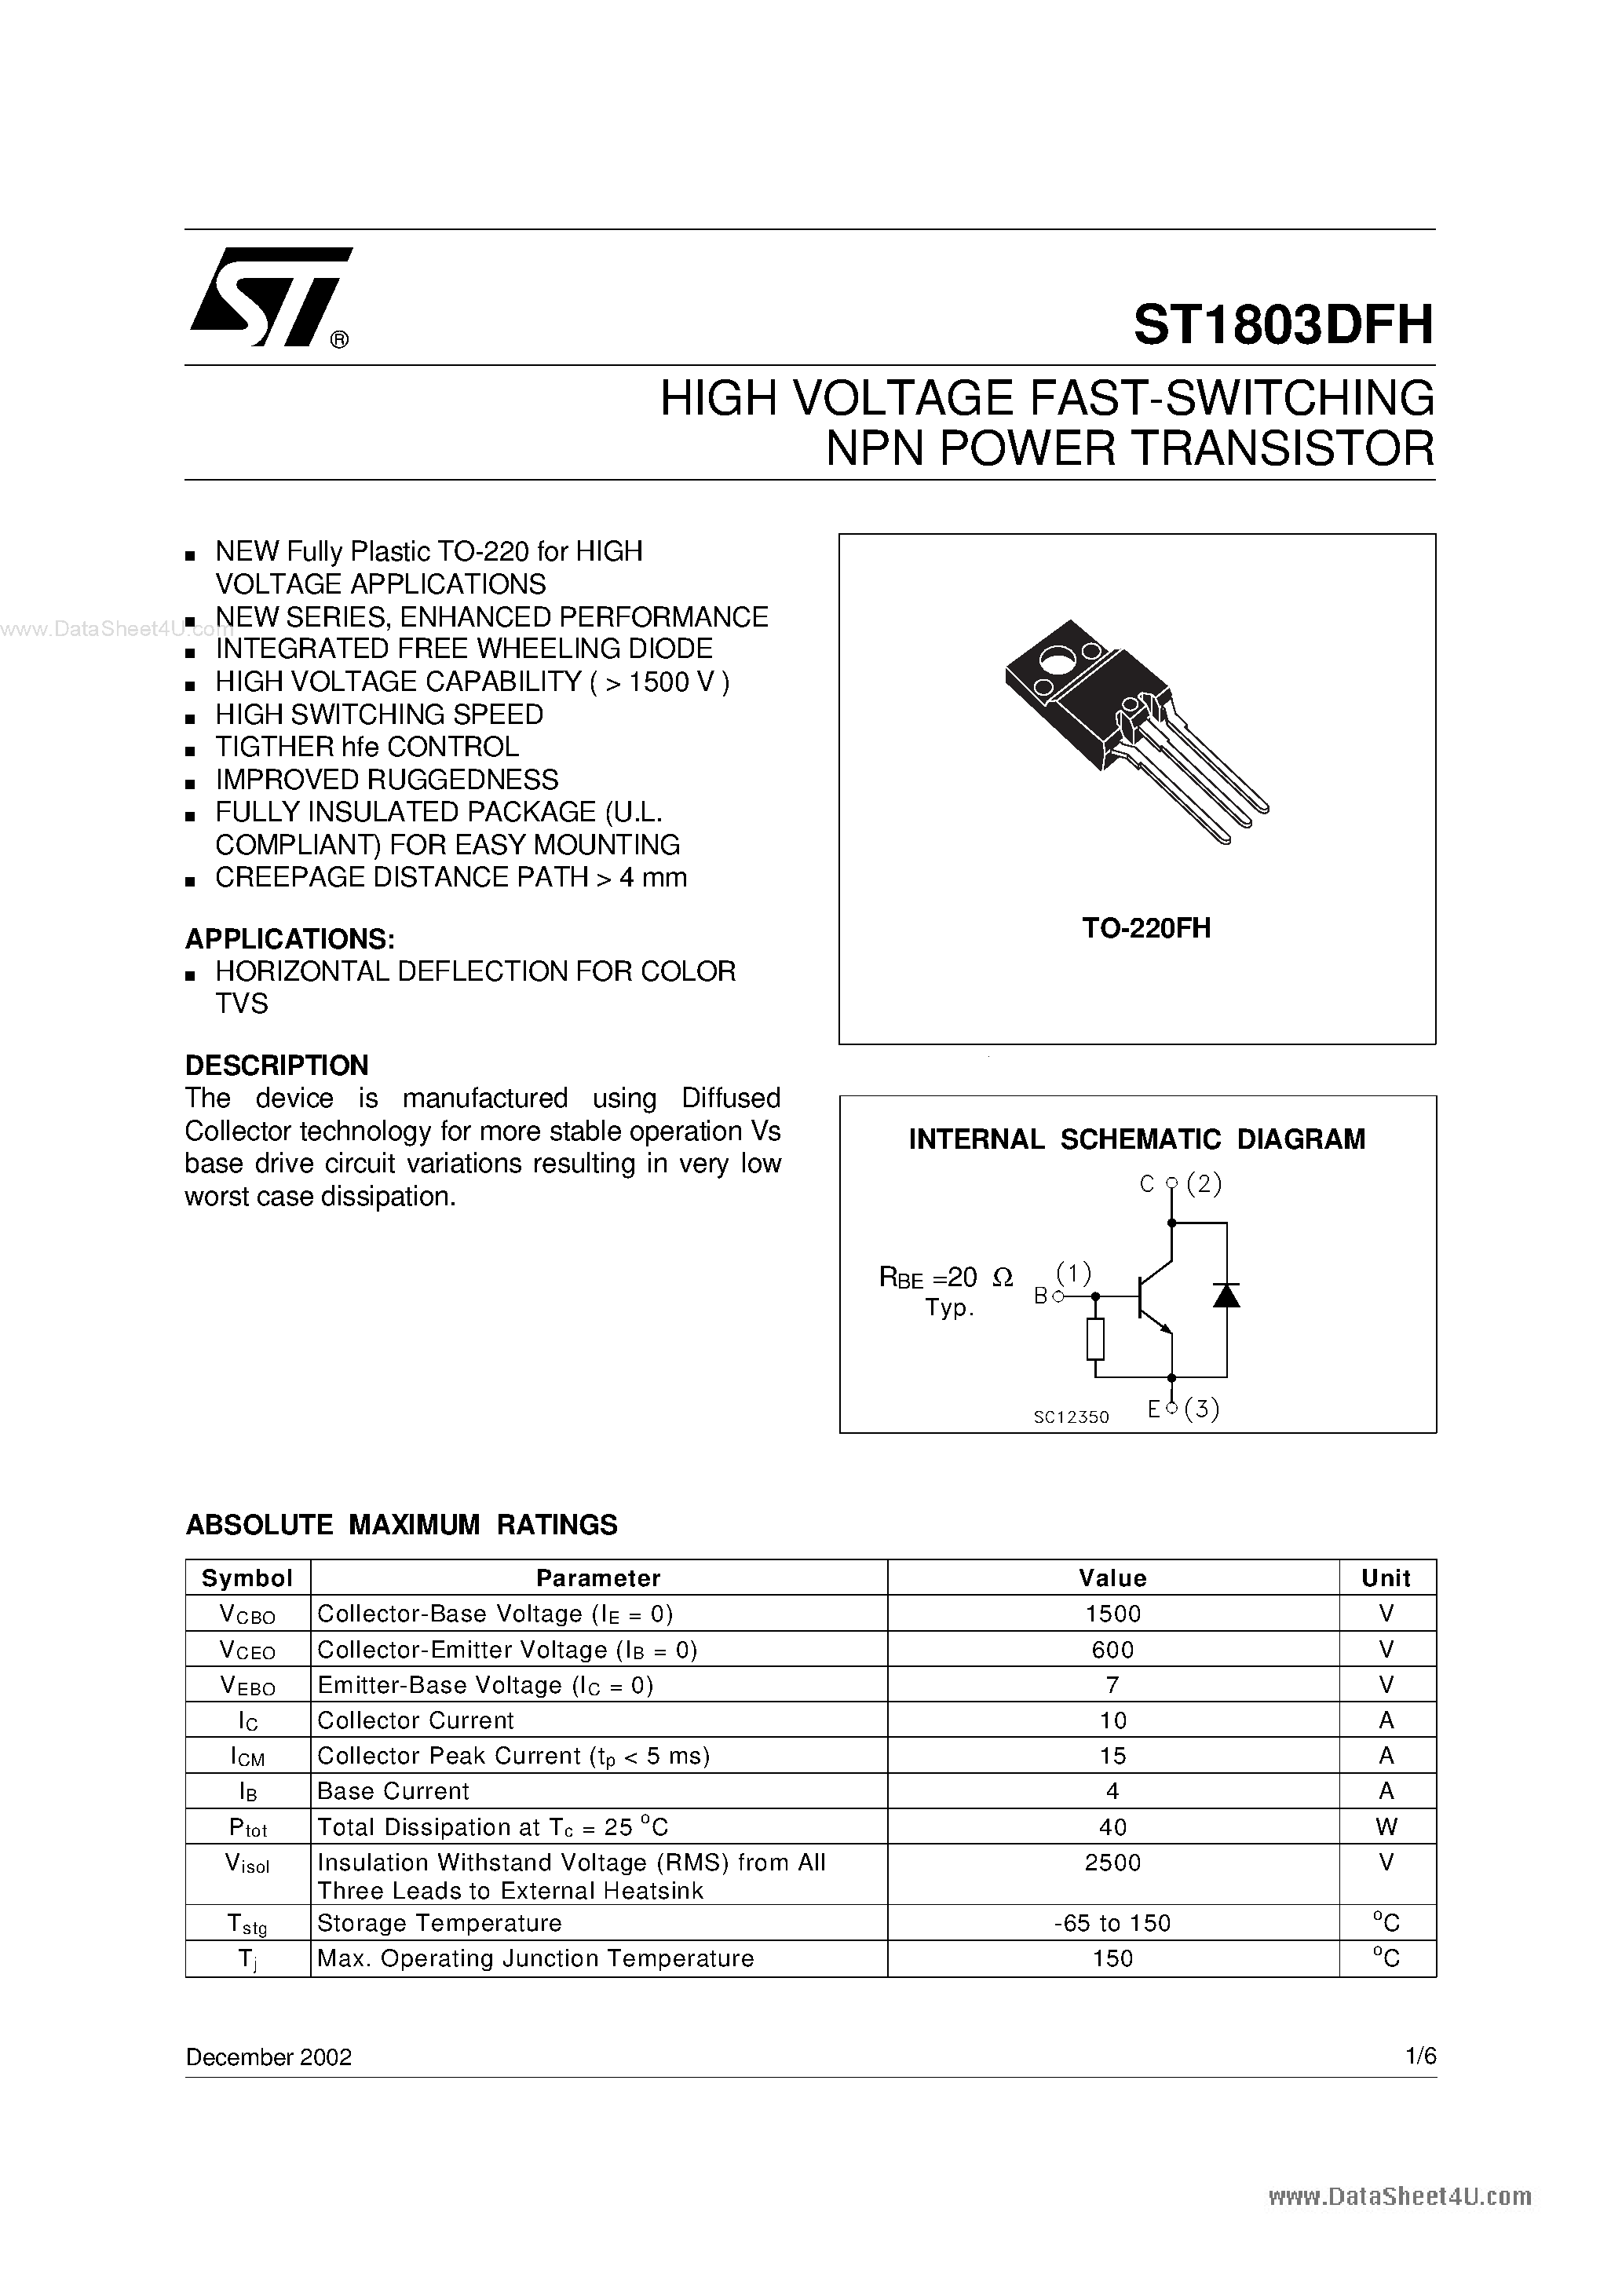 Datasheet 1803DFH - Search -----> ST1803DFH page 1